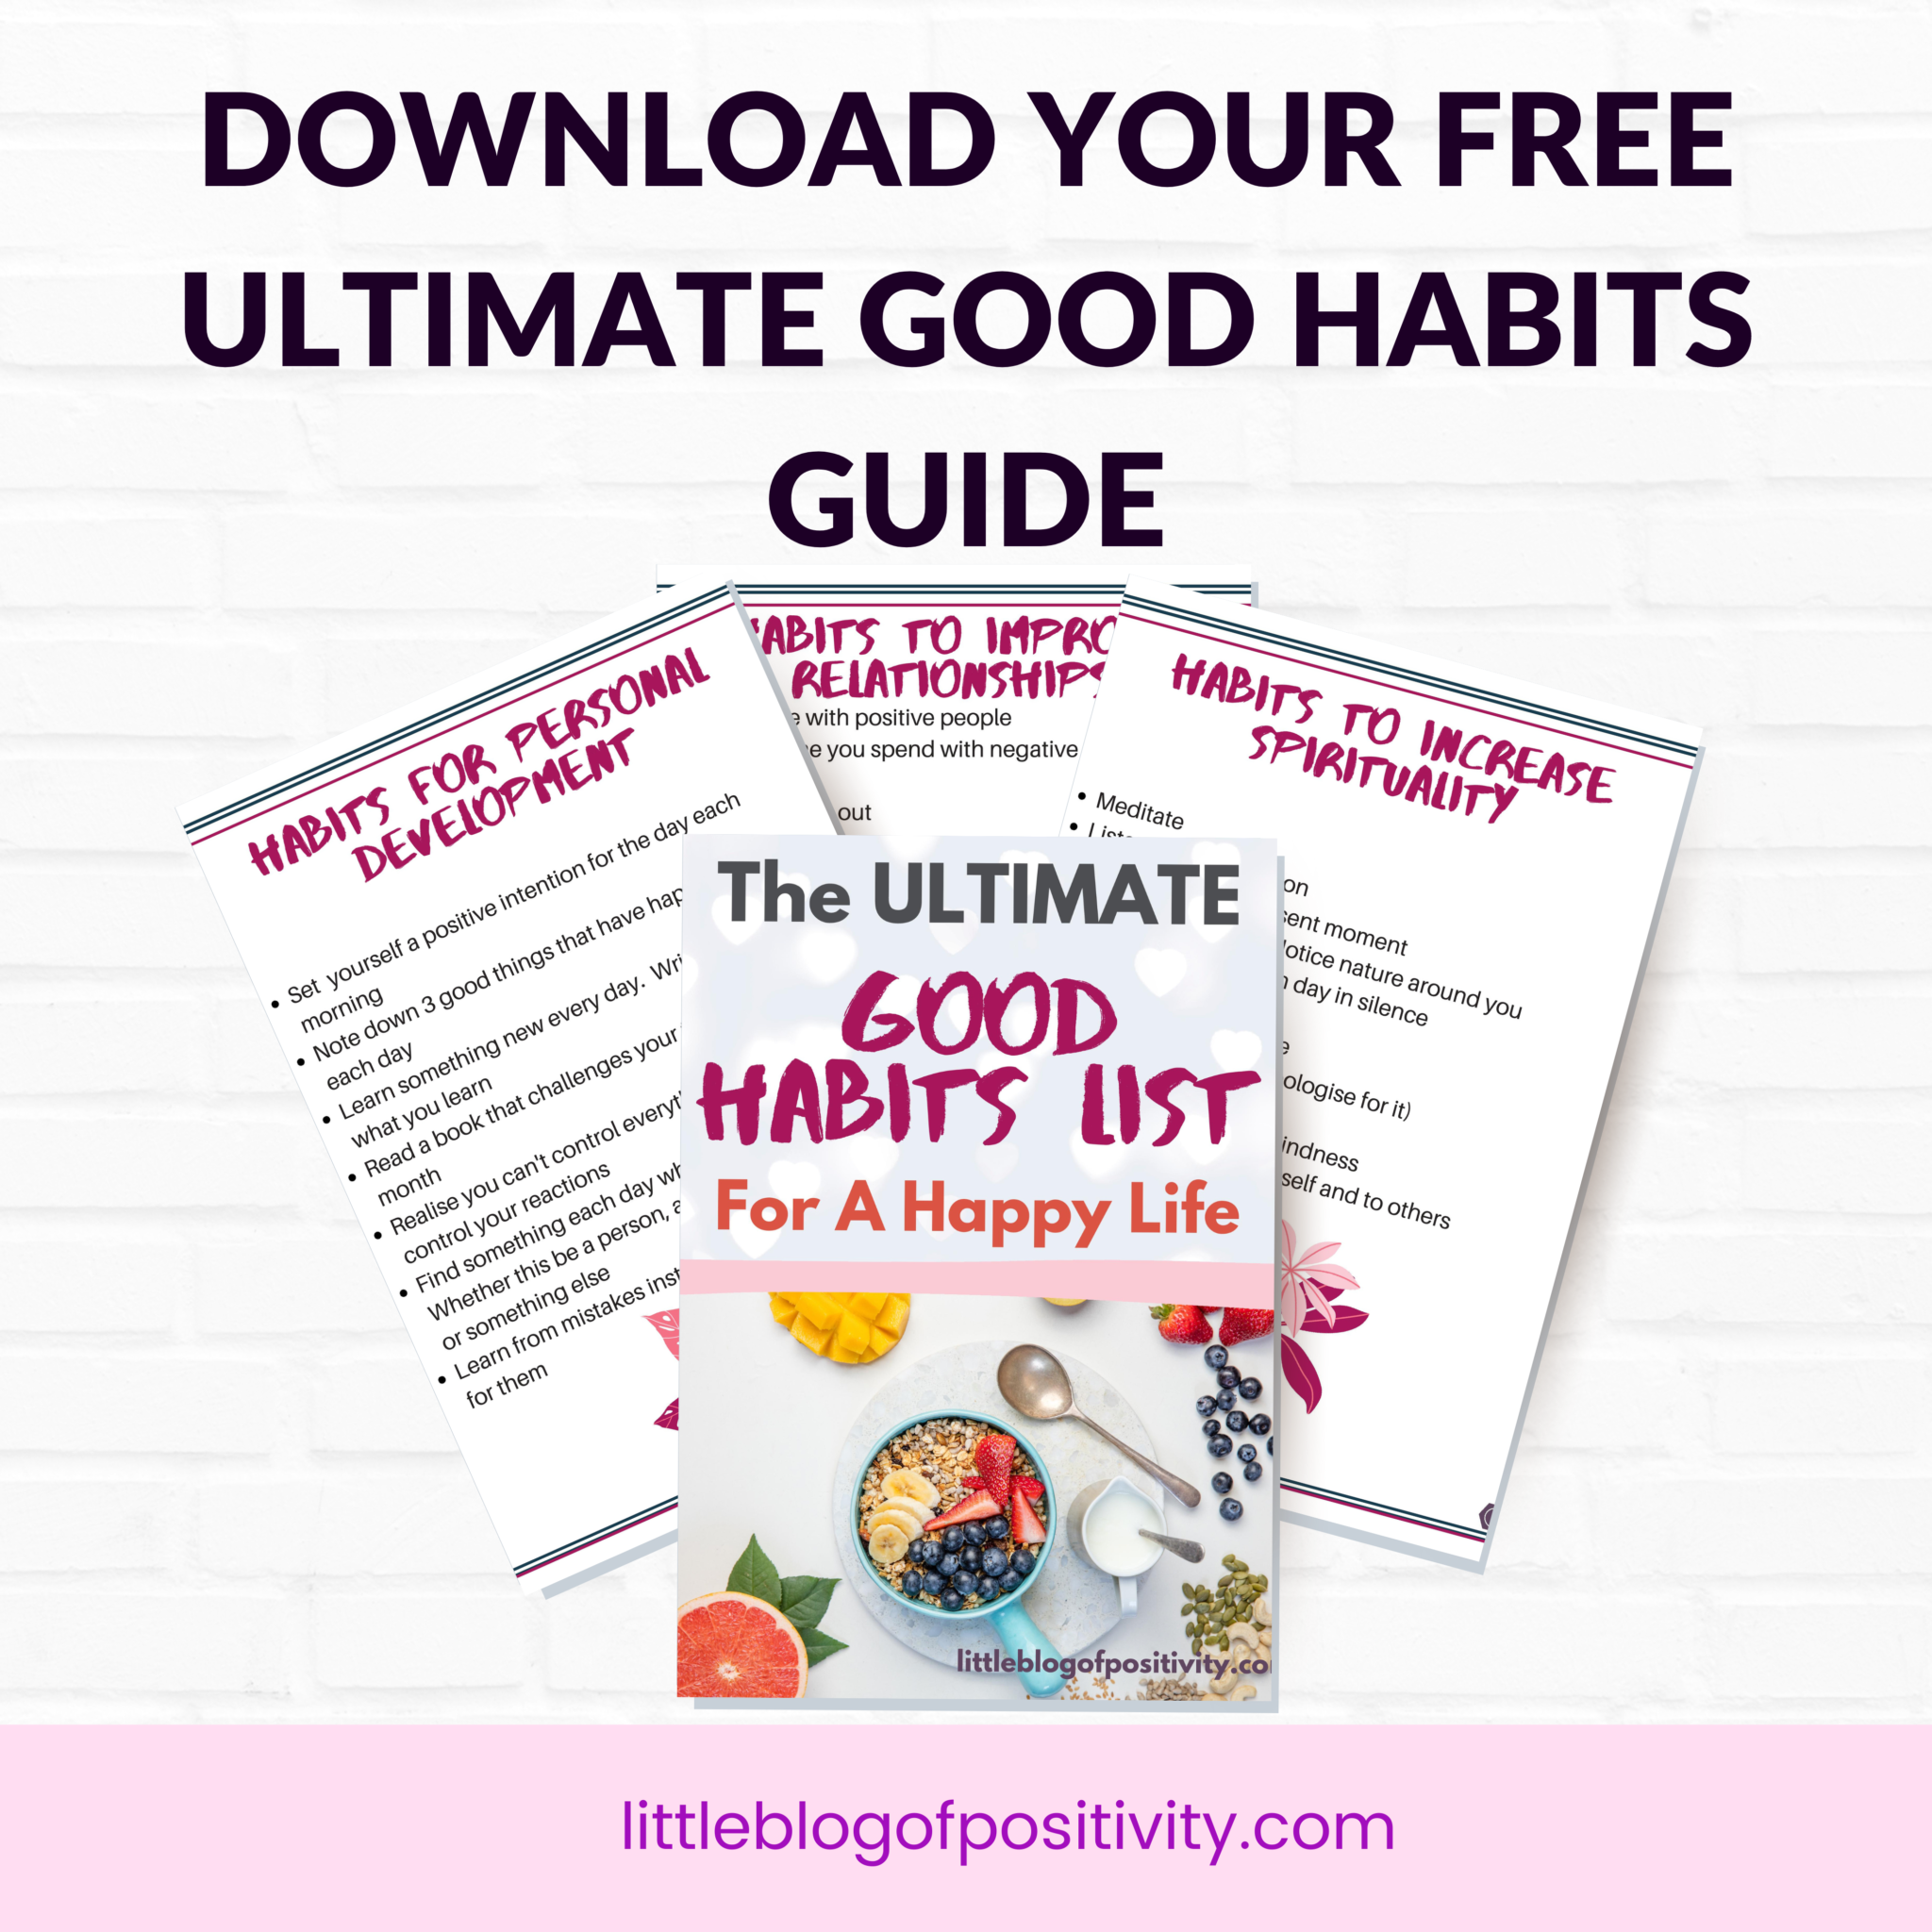 download your free ultimate good habits guide